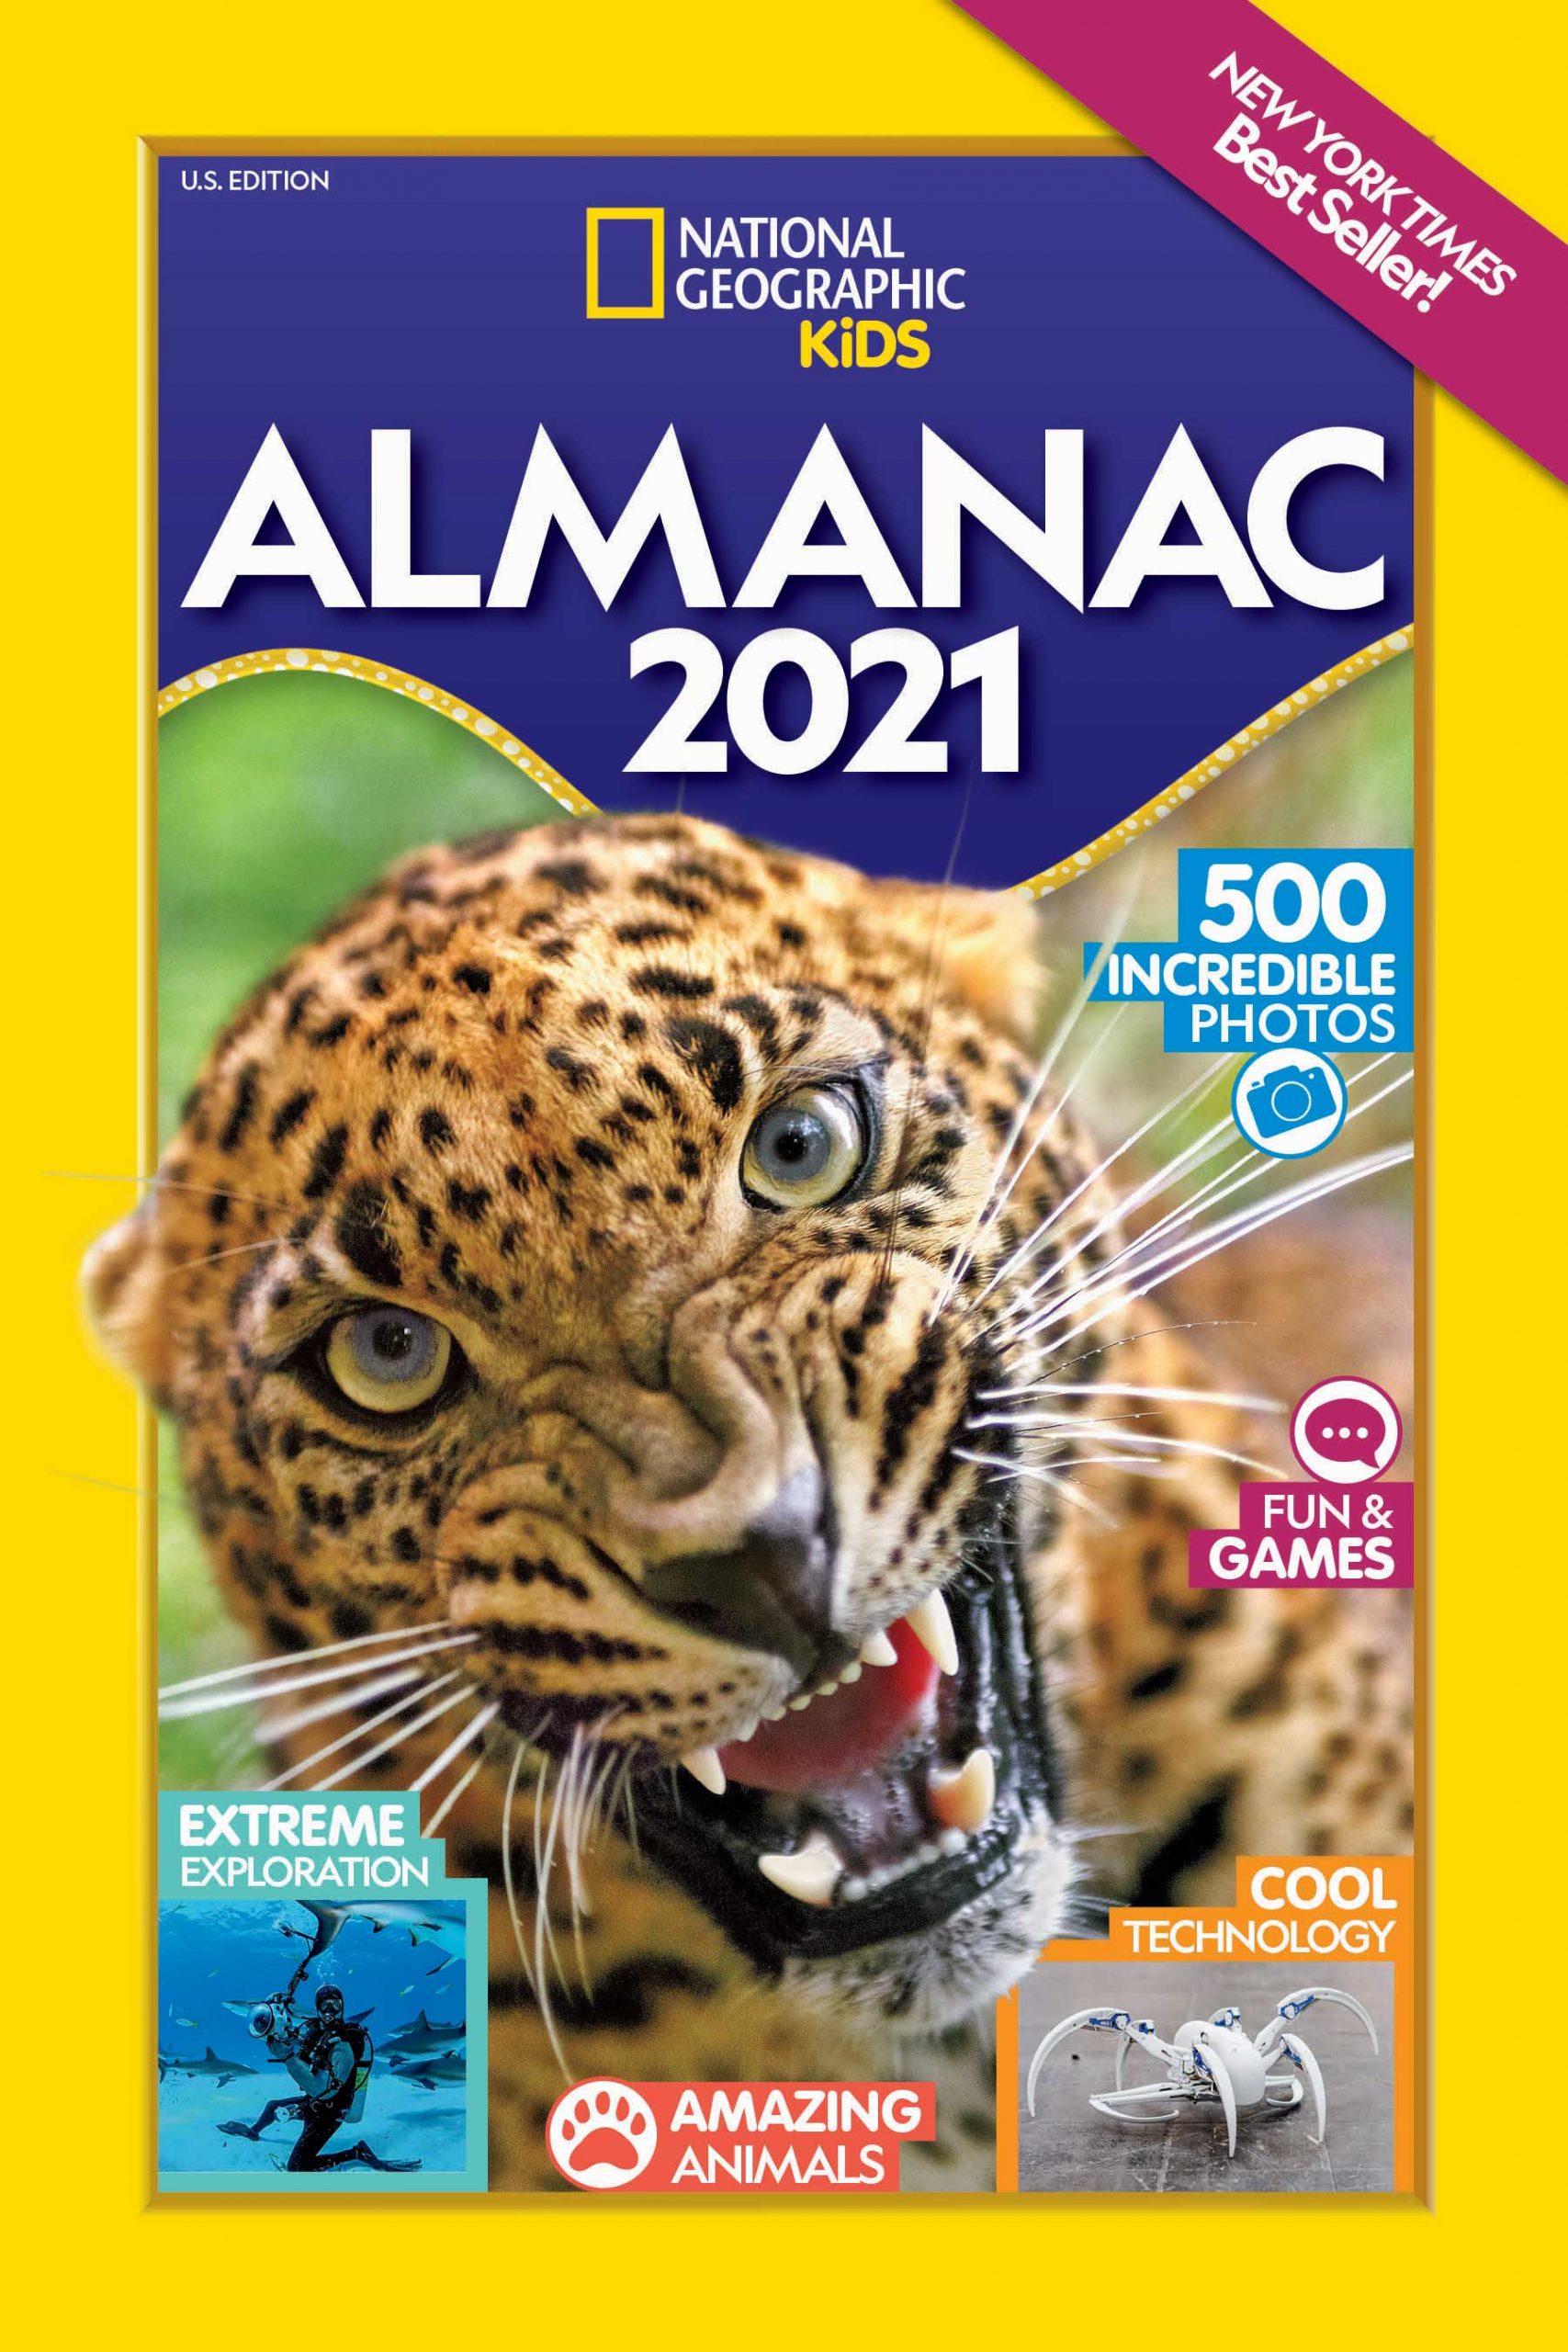 'The National Geographic Kids Almanac 2021' and Almanac Challenge are